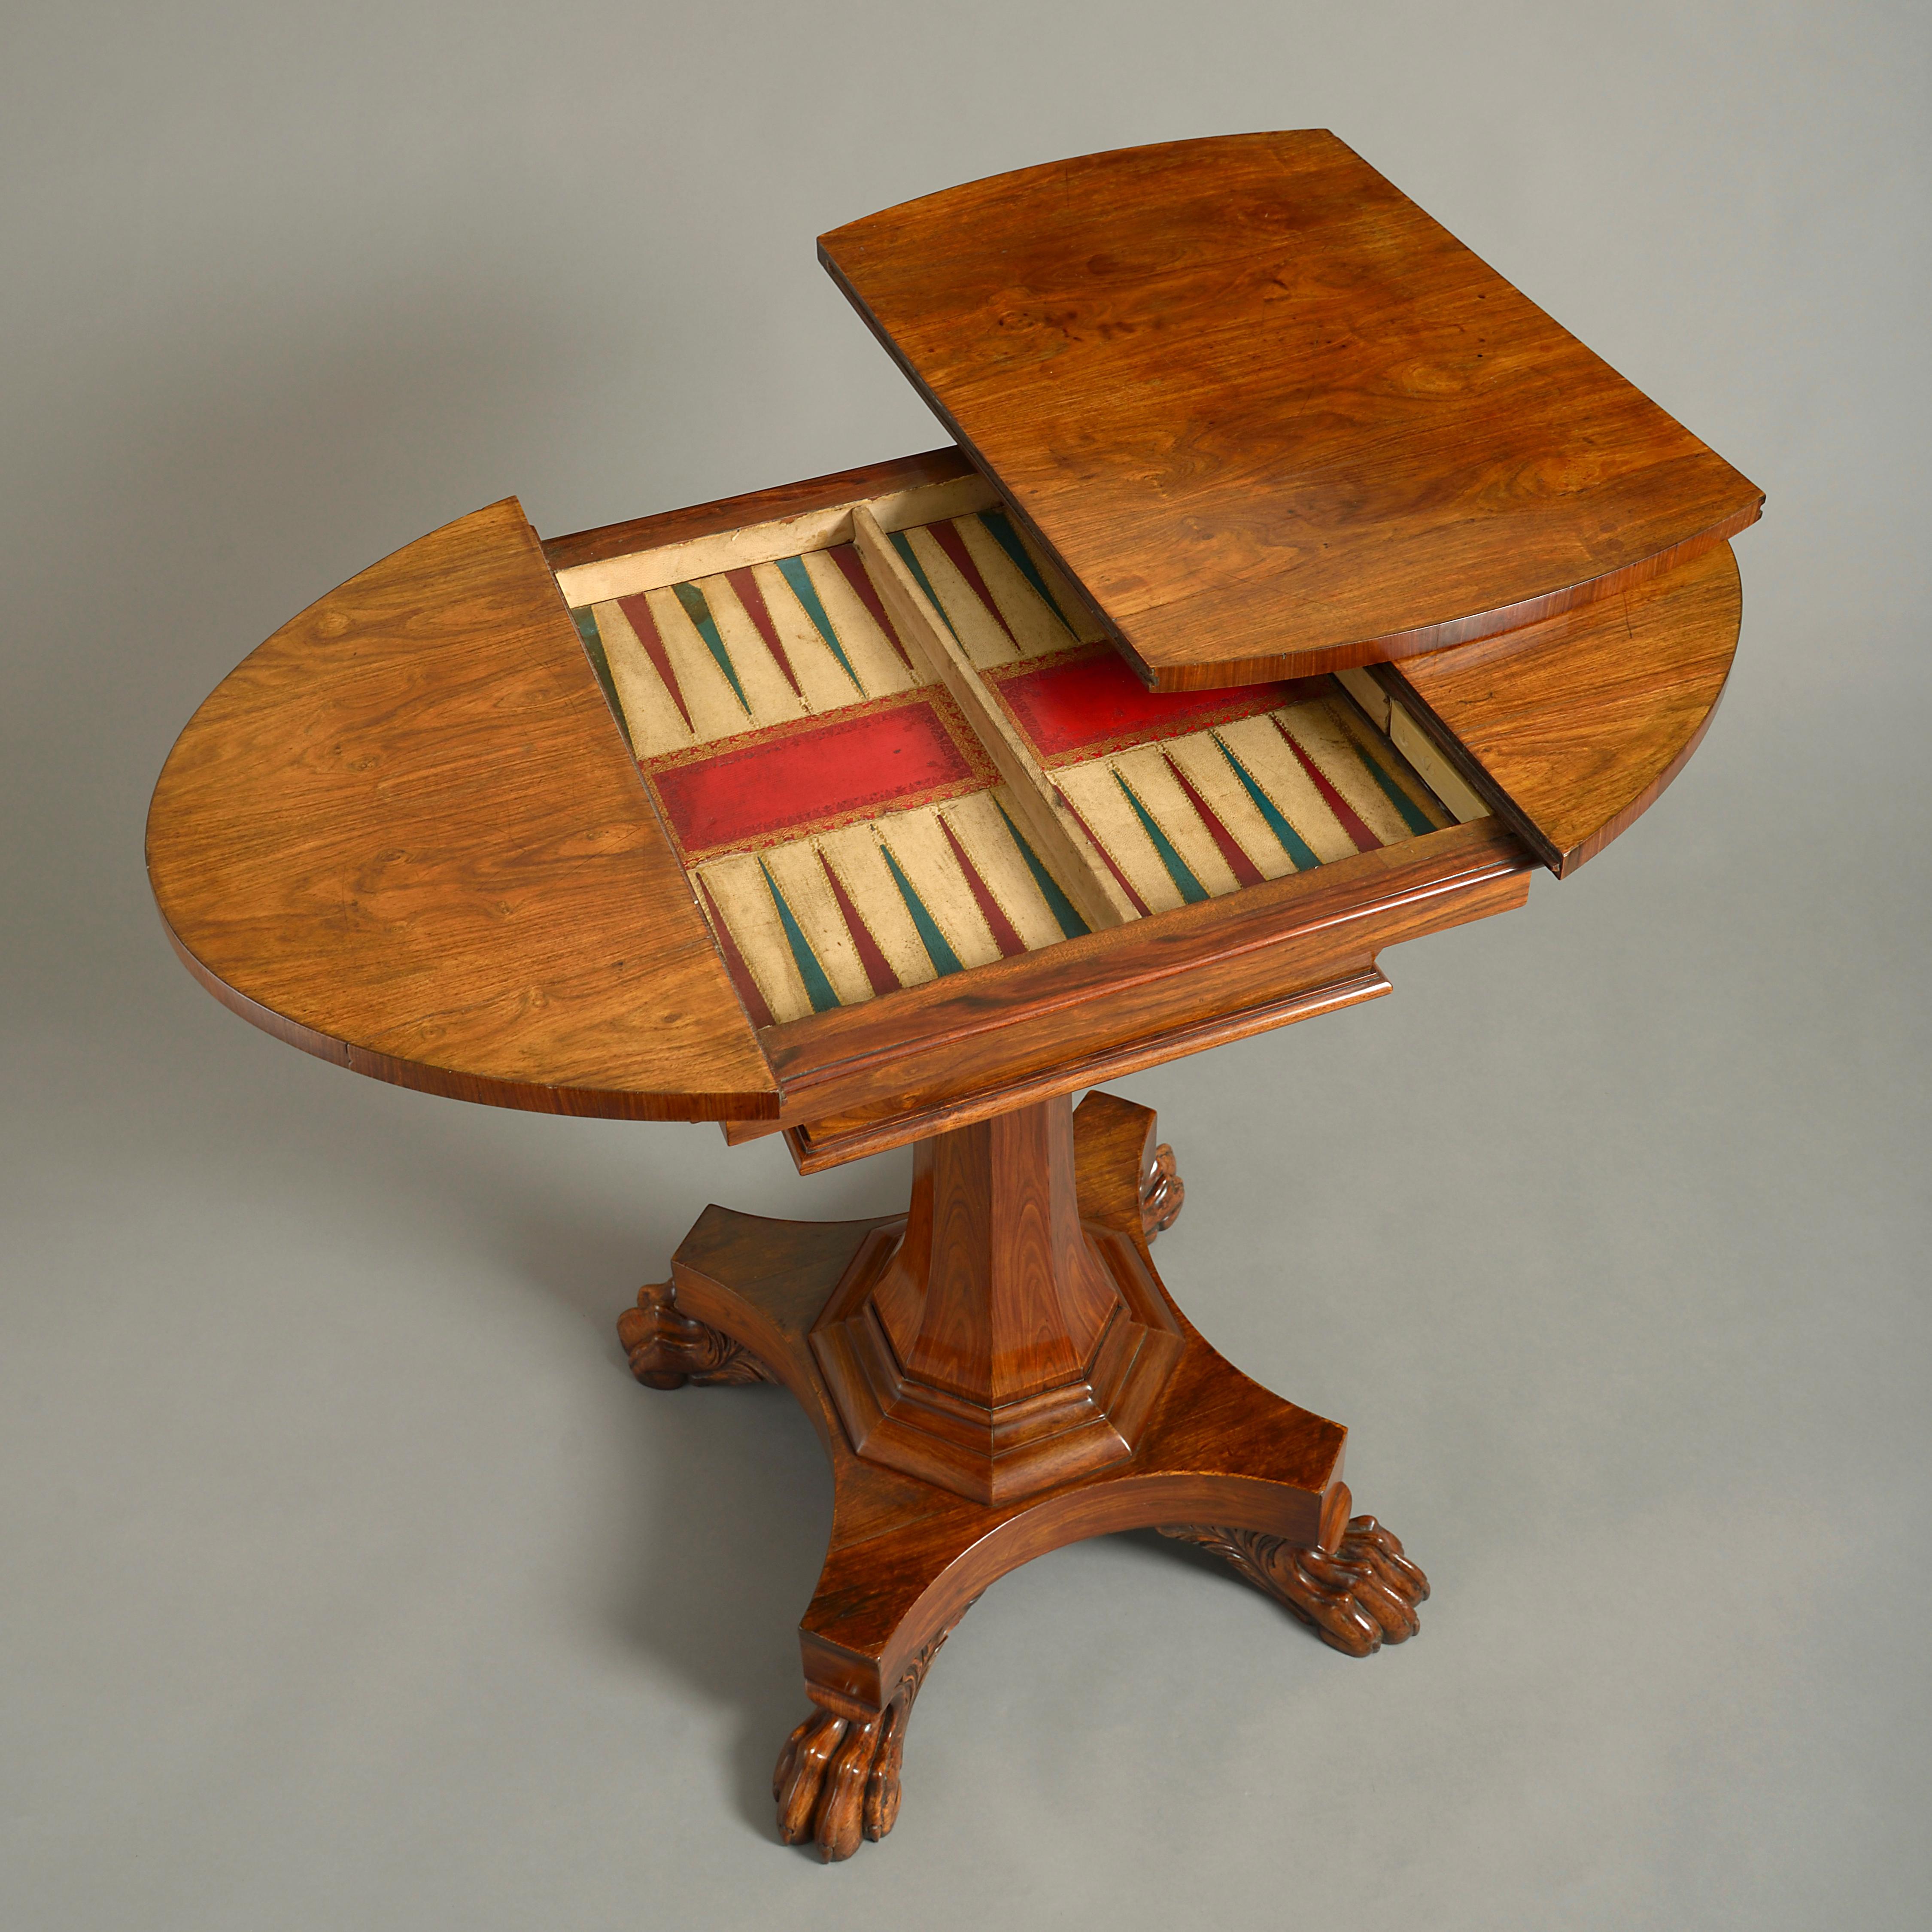 An early 19th century late Regency Period padouk wood games table, the oval top containing a recessed backgammon playing surface and raised upon a tapering octagonal stem, set upon a concave plinth, terminating in carved lion’s paw feet.